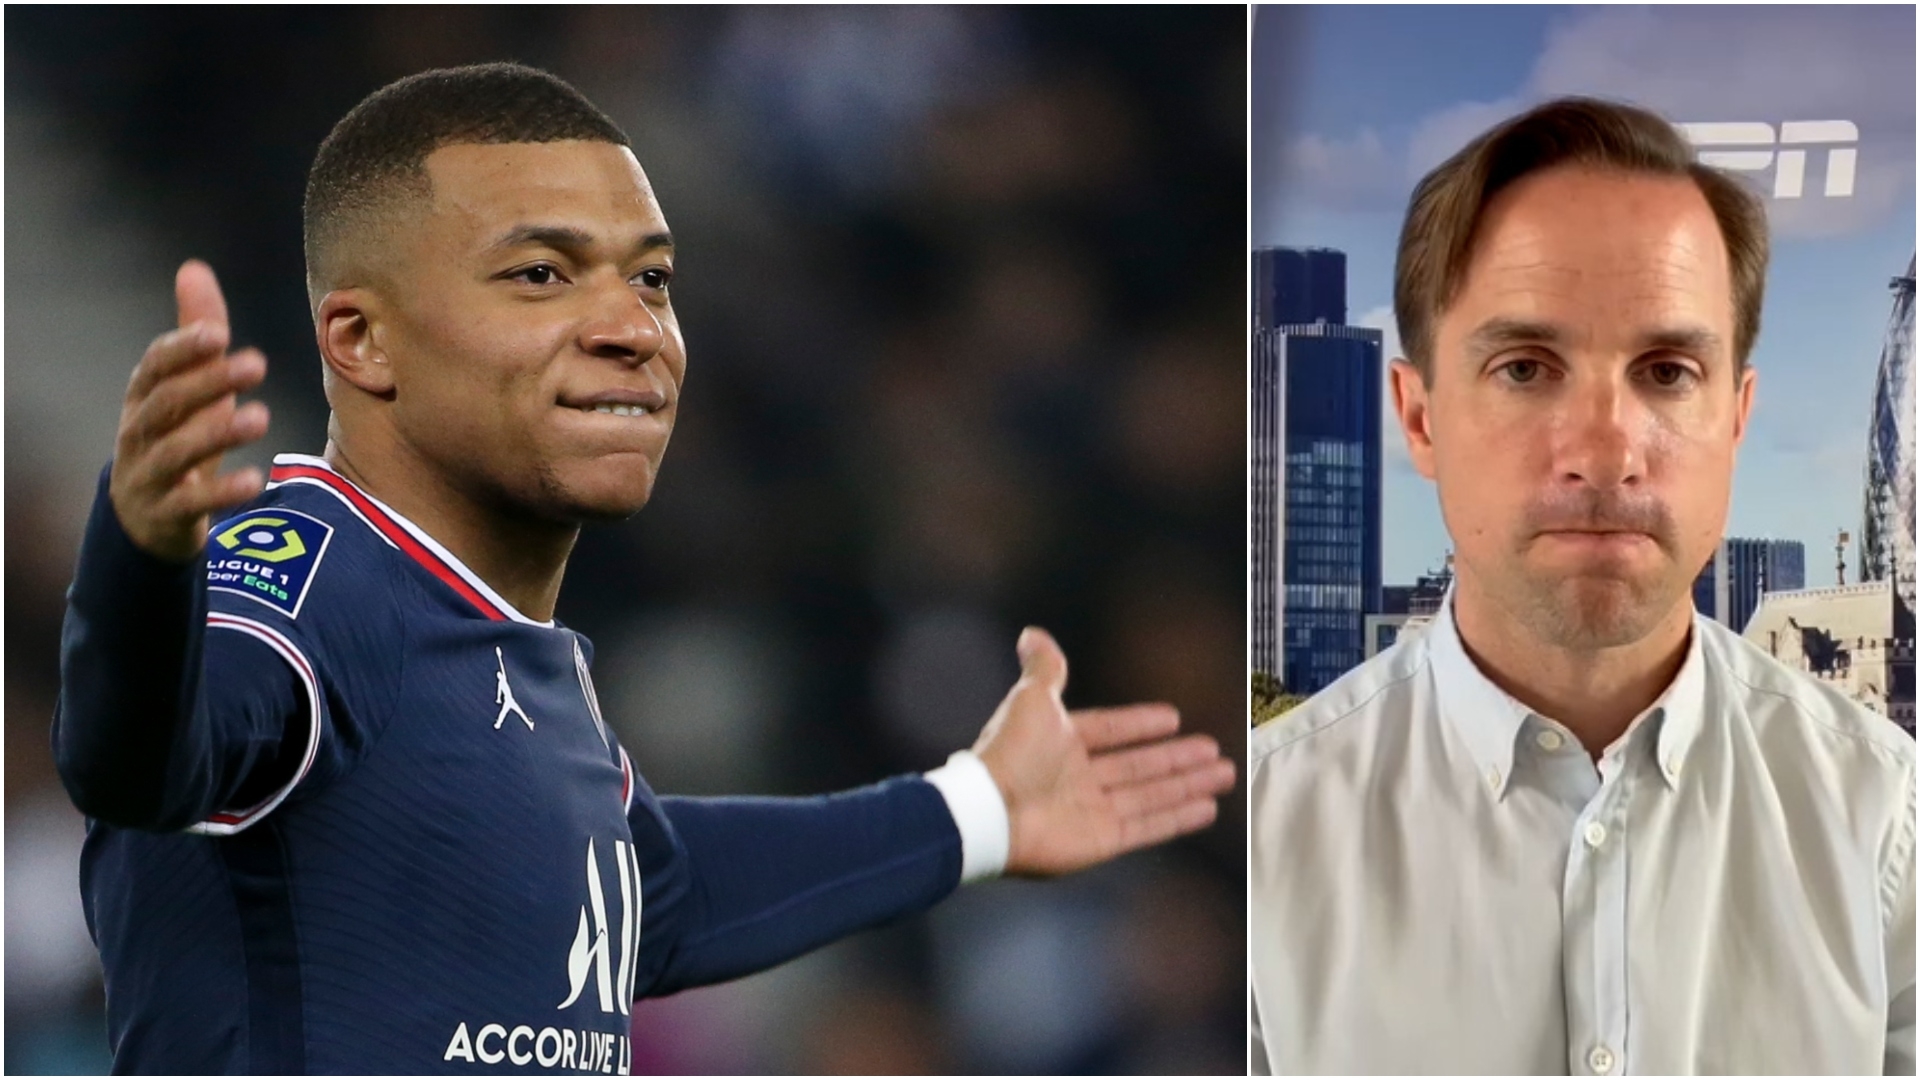 Laurens PSG believe Kylian Mbappe will join Real Madrid - Stream the Video 